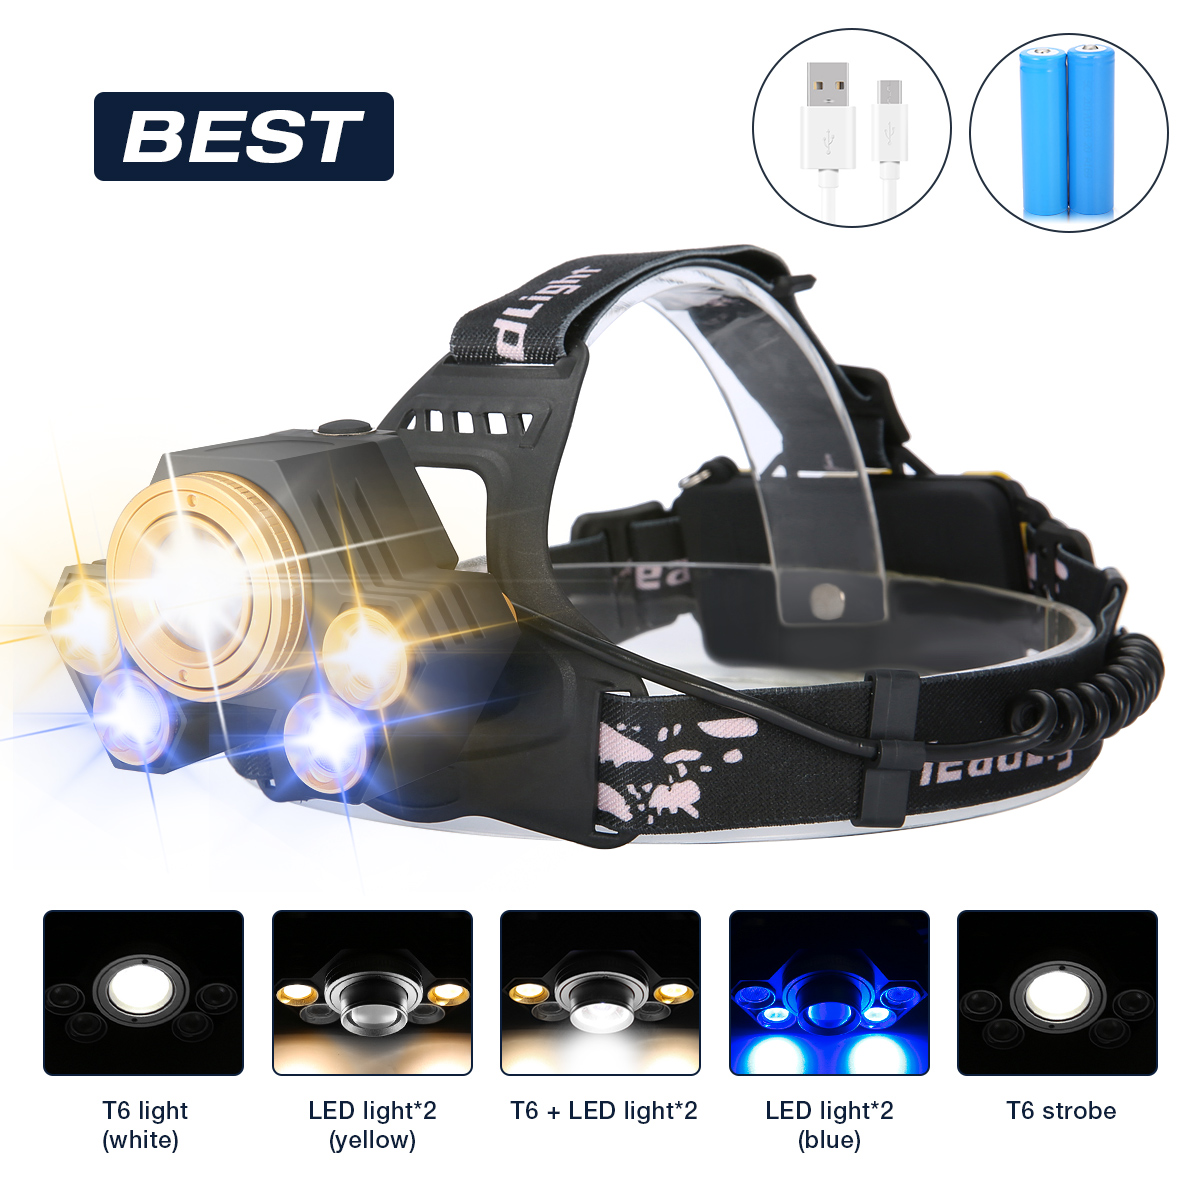 Hiking 3 Light Modes & 90°Adjustable Rotating Waterproof with 18650 Rechargeable Batteries for Camping Fishing Head Torch 800 Lumens Zoomable LED Headlamp 